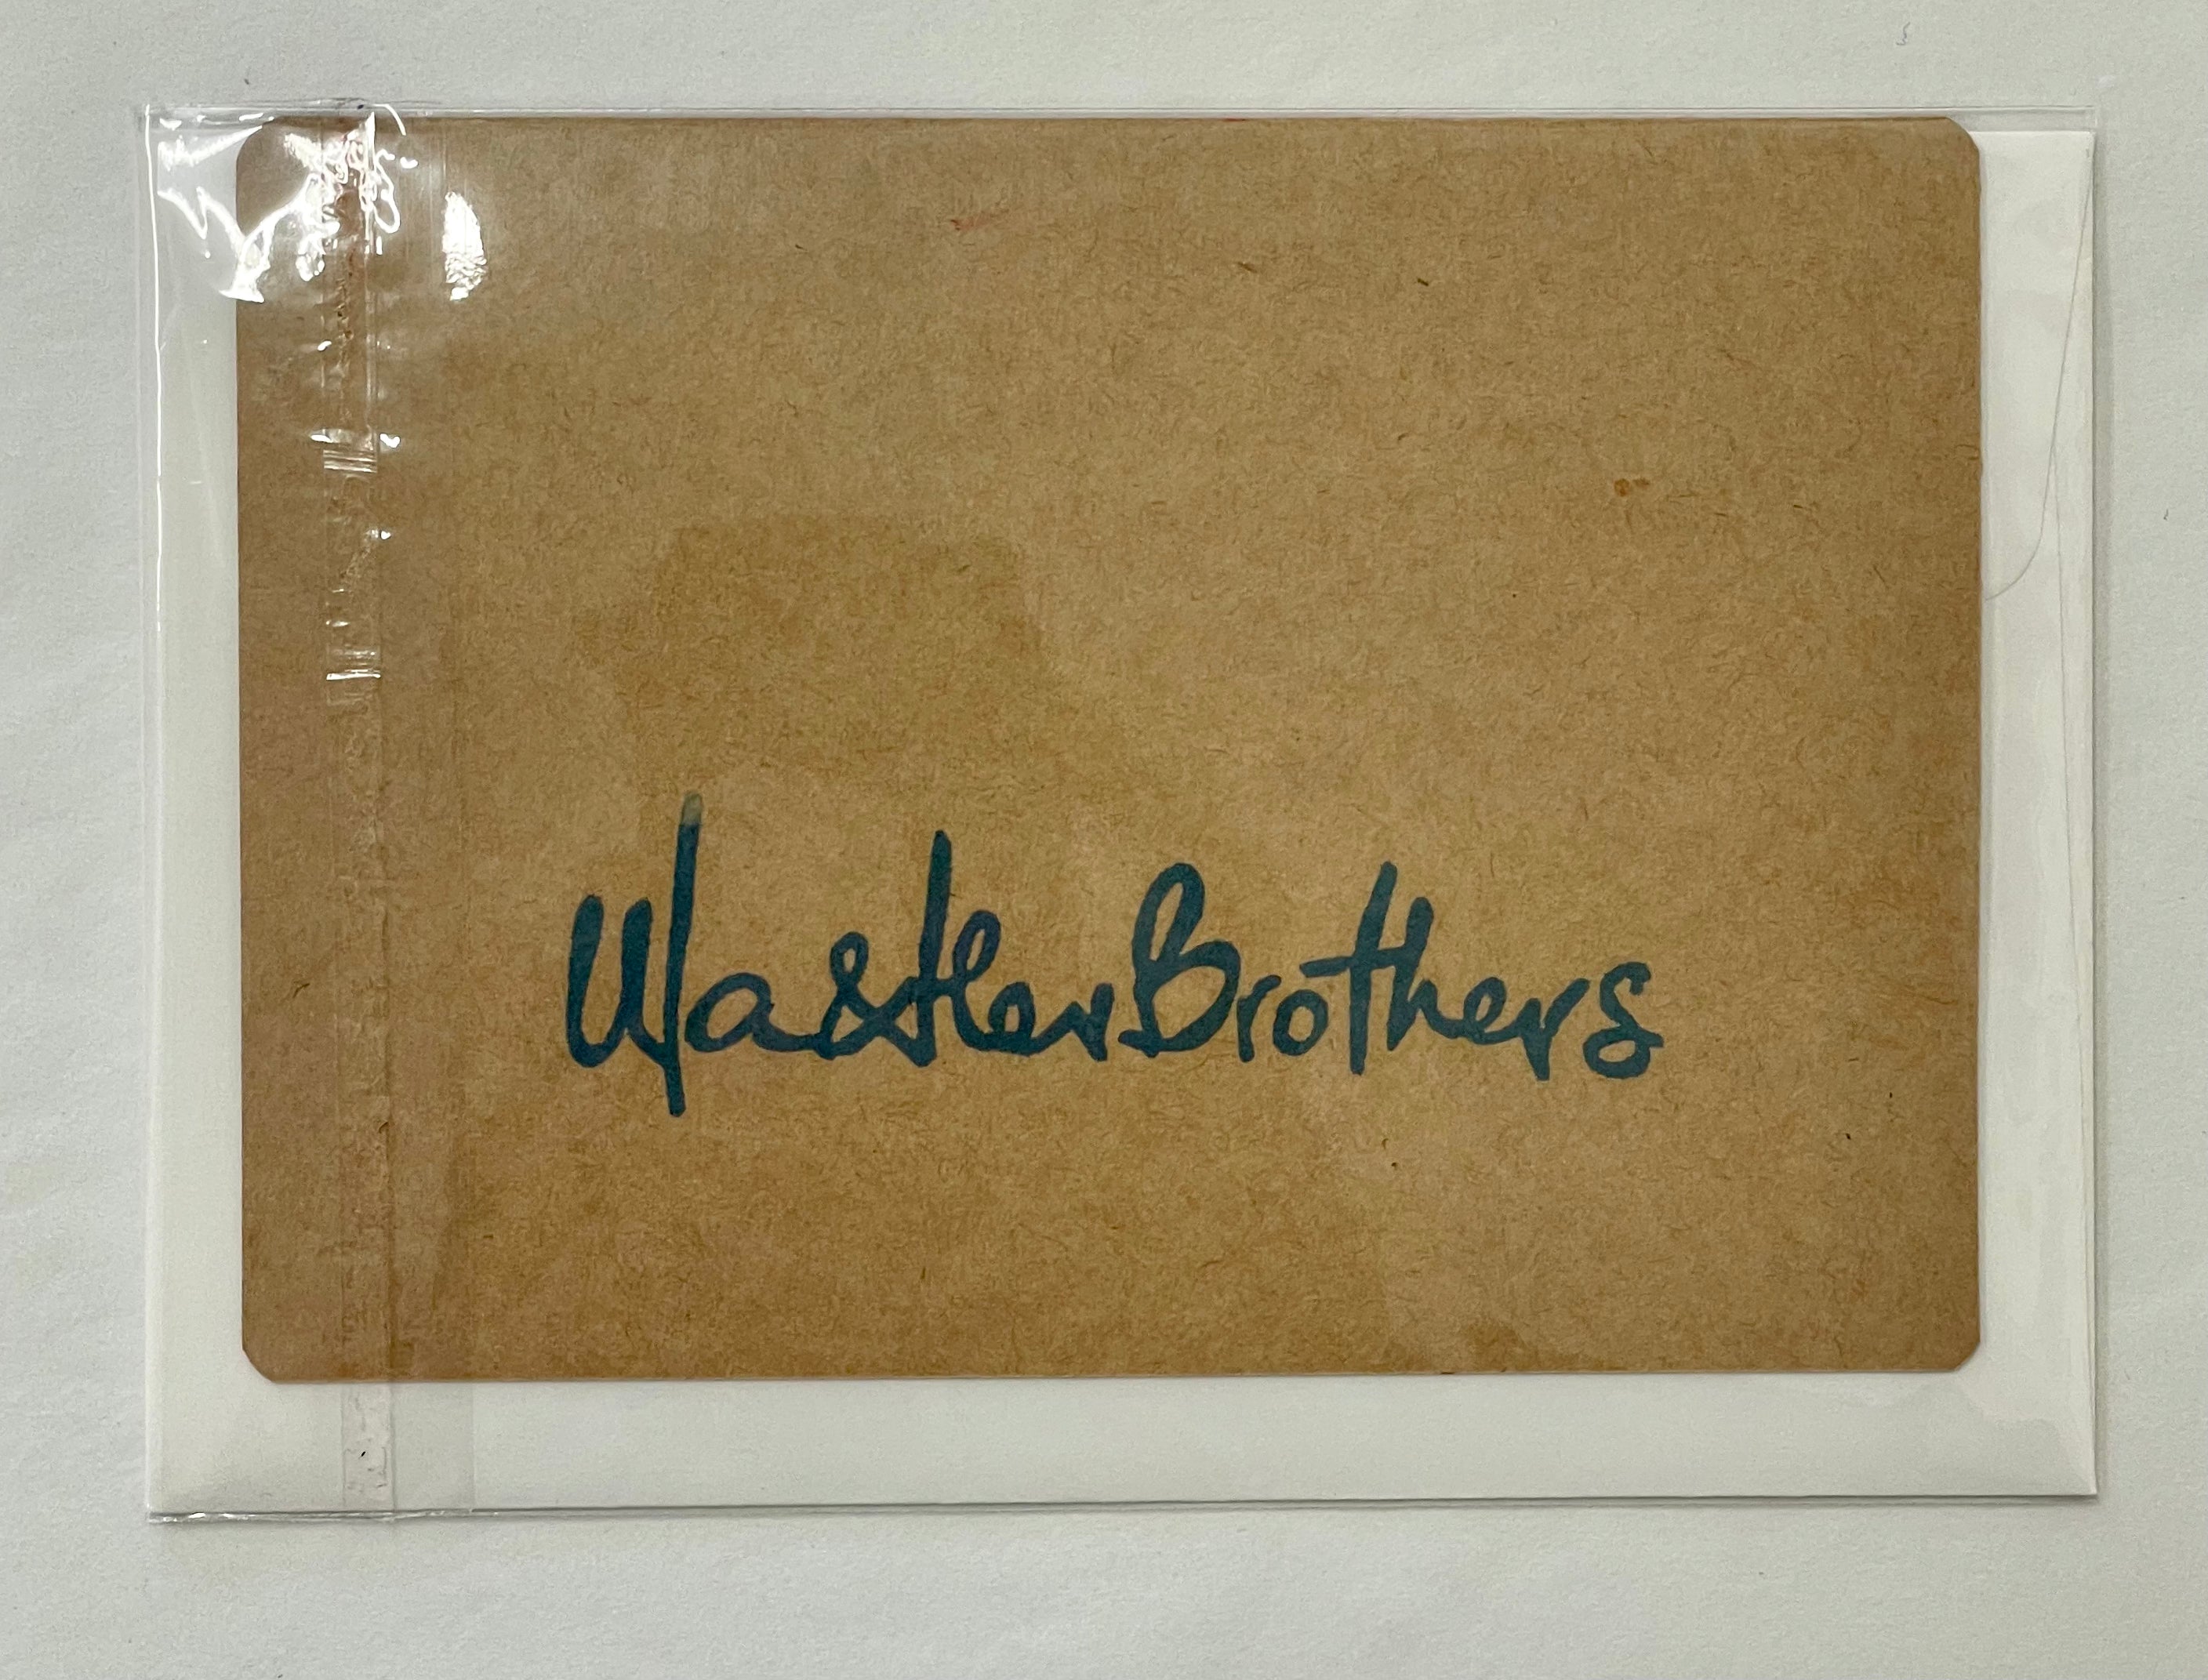 Malo 'Aupito Handmade & Handprinted Card by Ula&HerBrothers